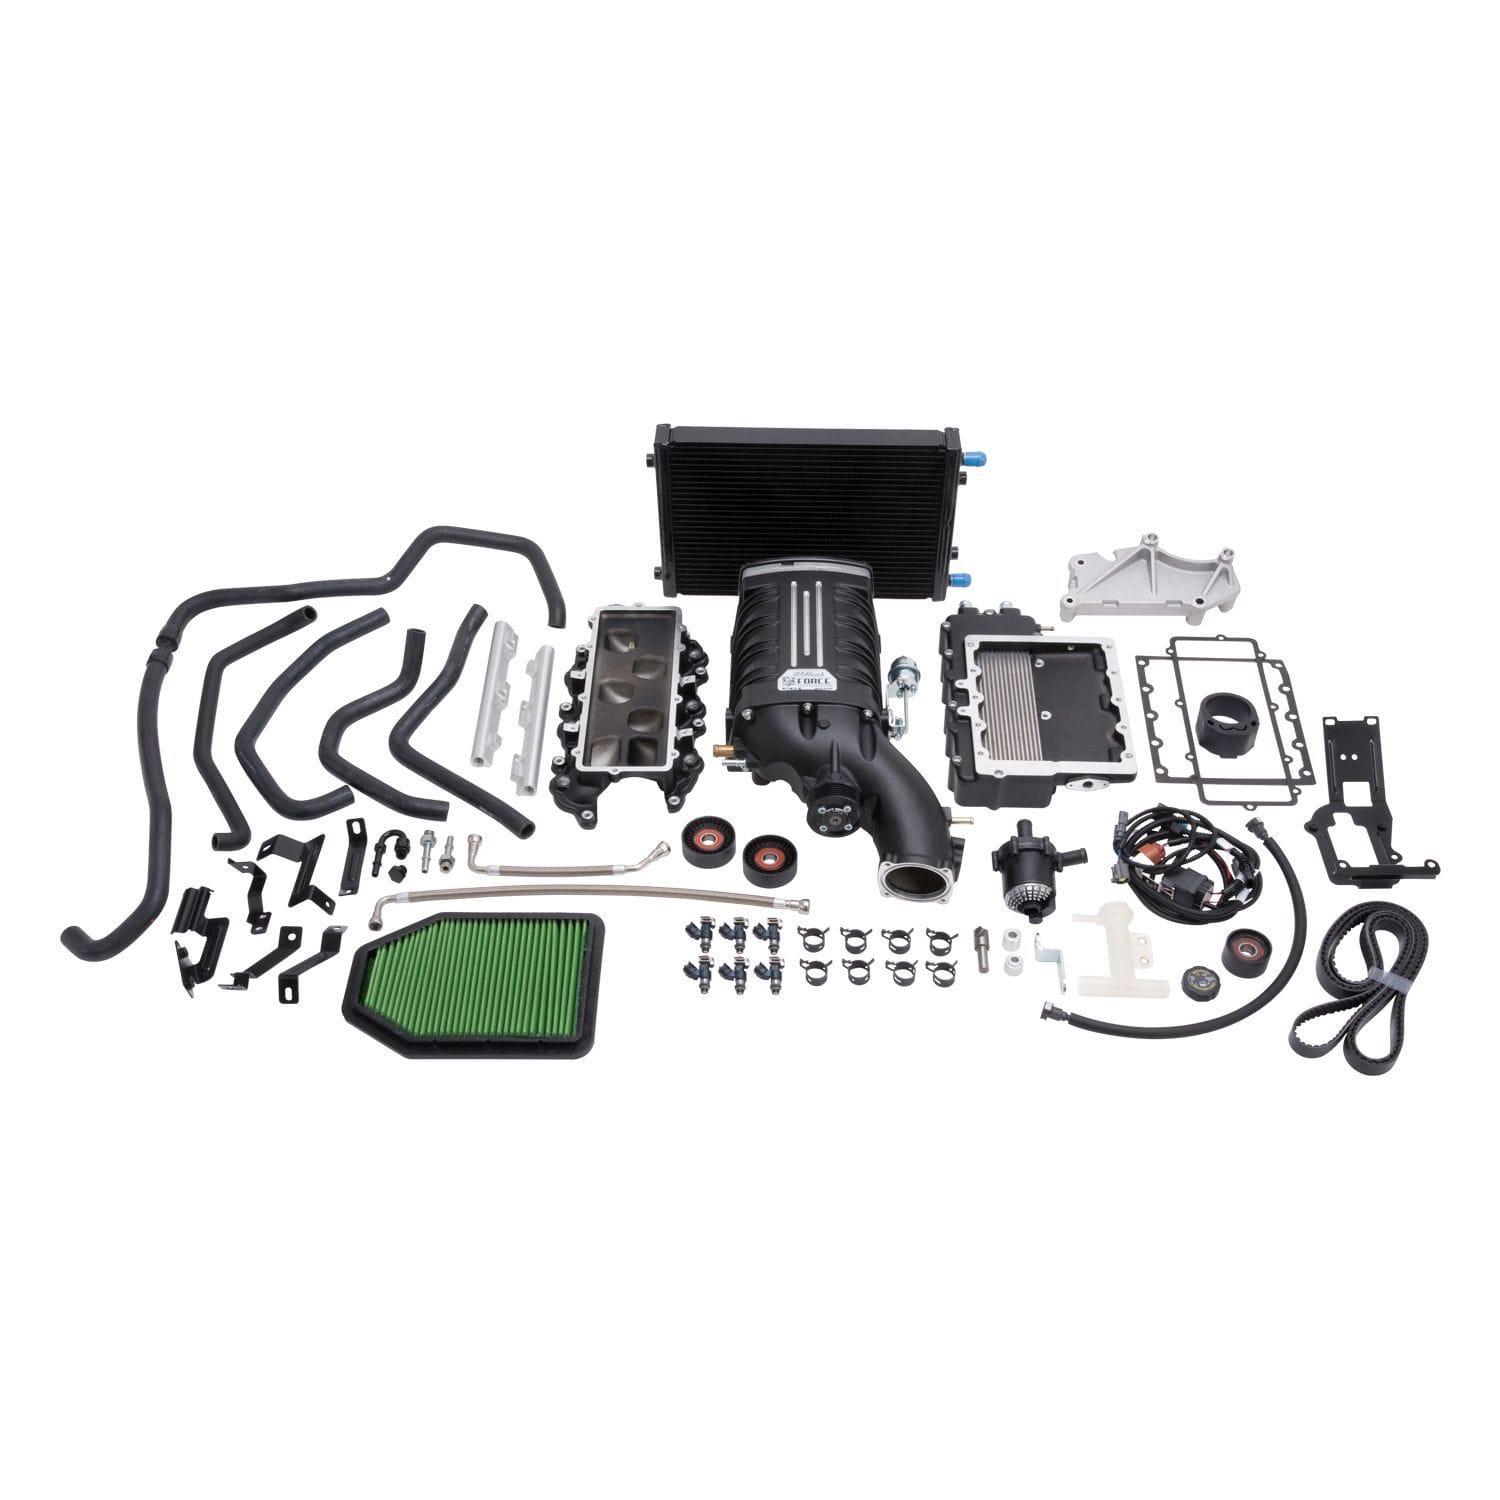 Accessories - Edelbrock E-Force Supercharger Kit - New - 2015 to 2017 Jeep Wrangler - San Dimas, CA 91773, United States